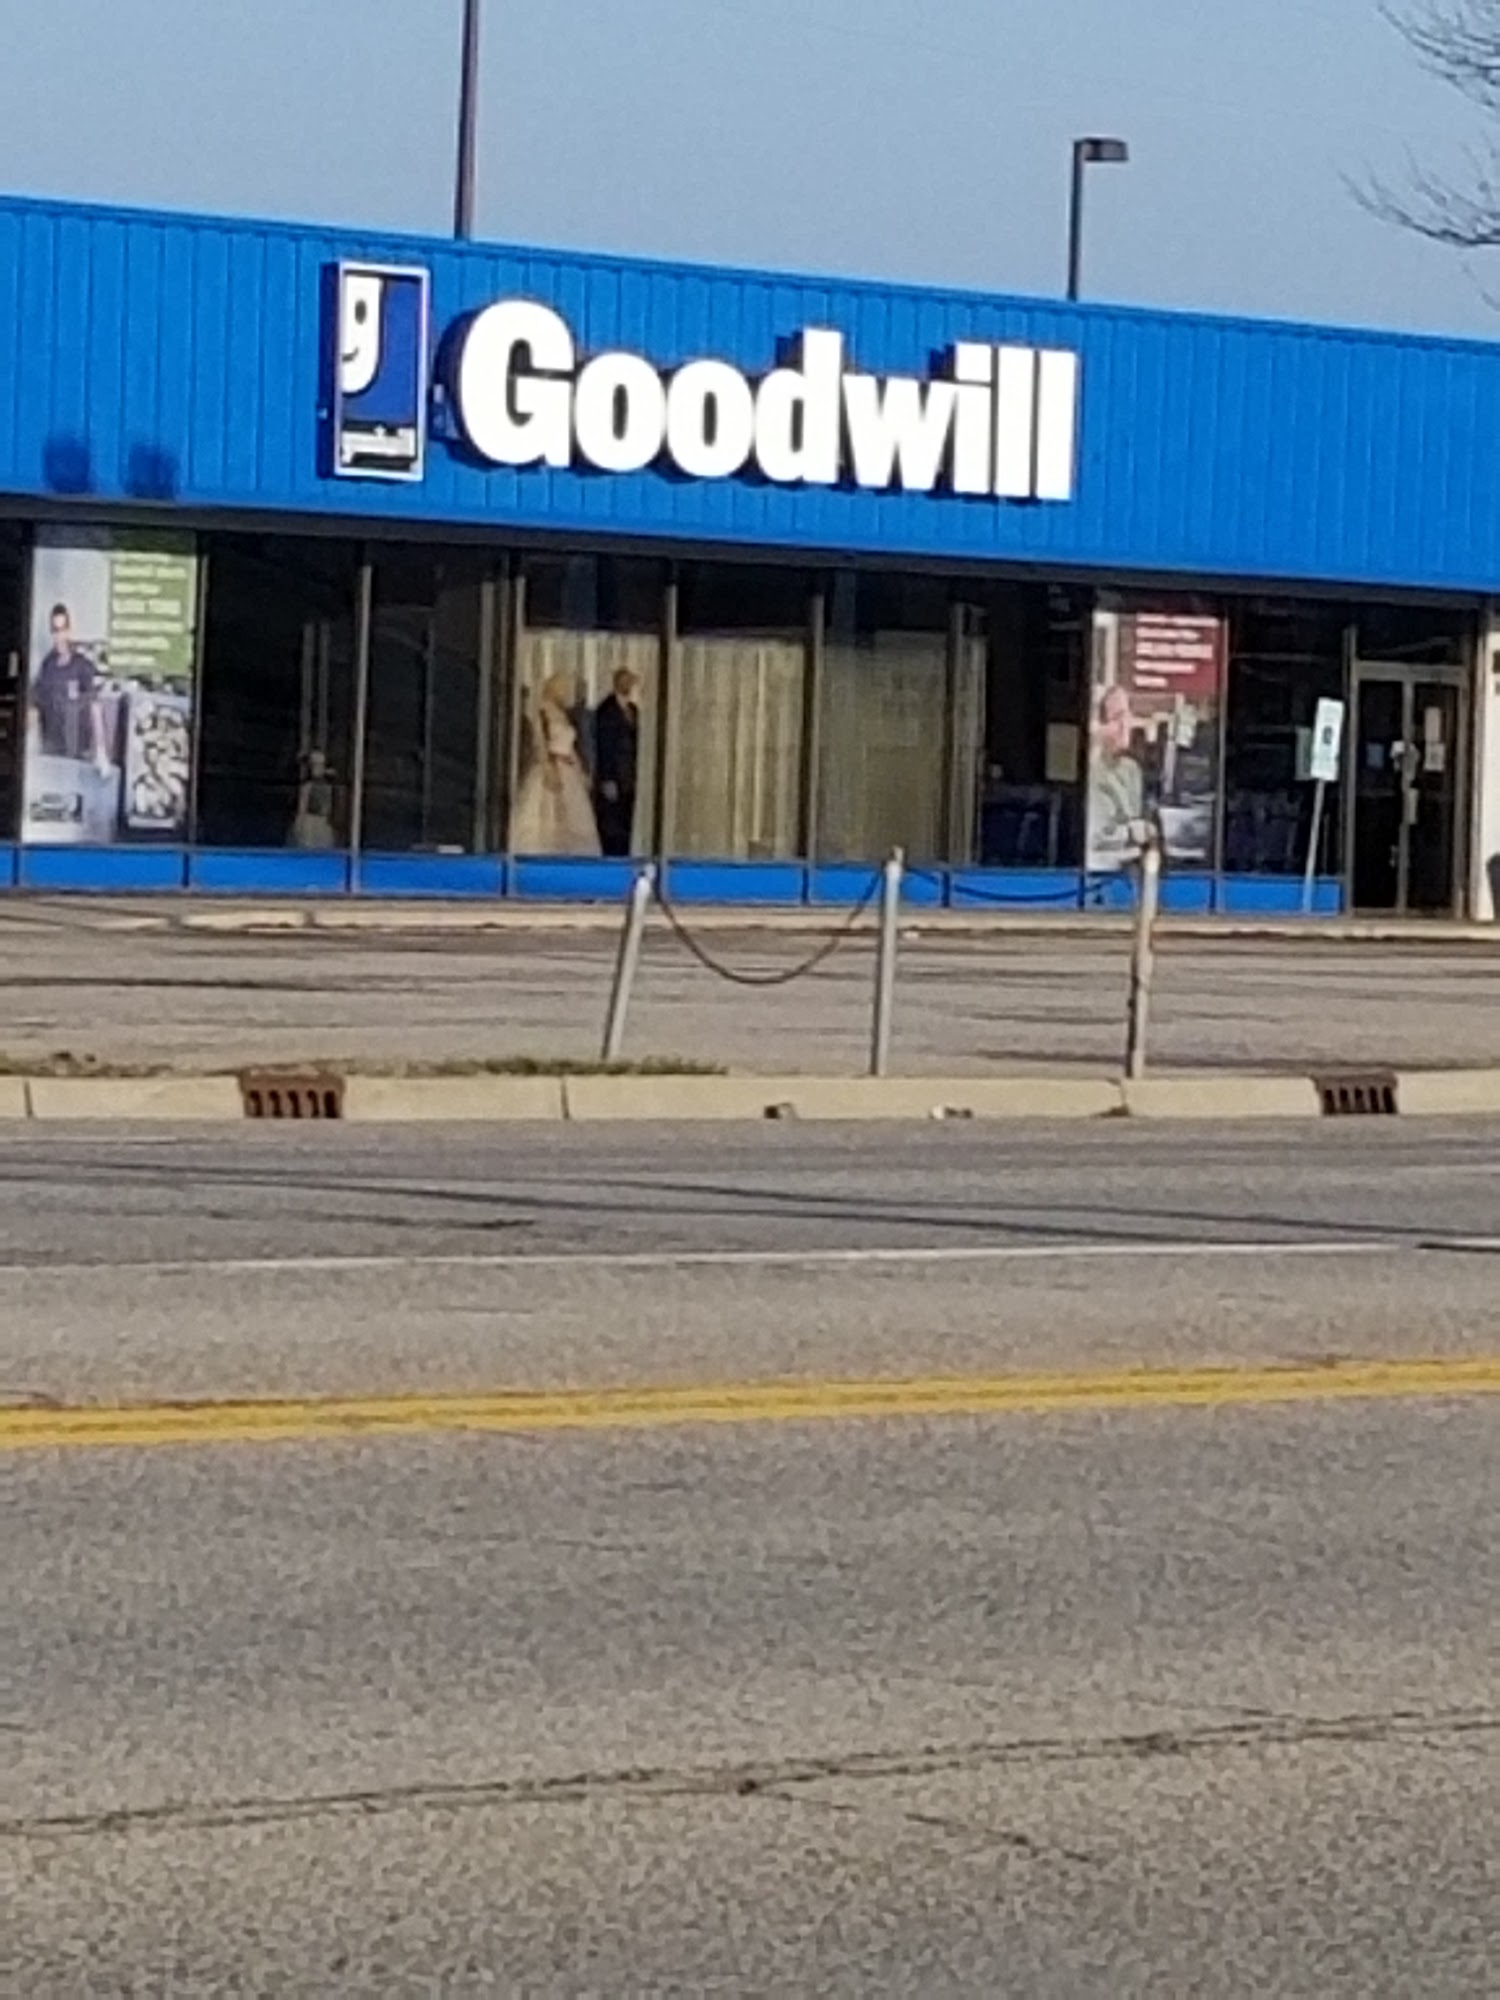 Goodwill Springfield IL Dirksen Parkway - Land of Lincoln Goodwill Industries